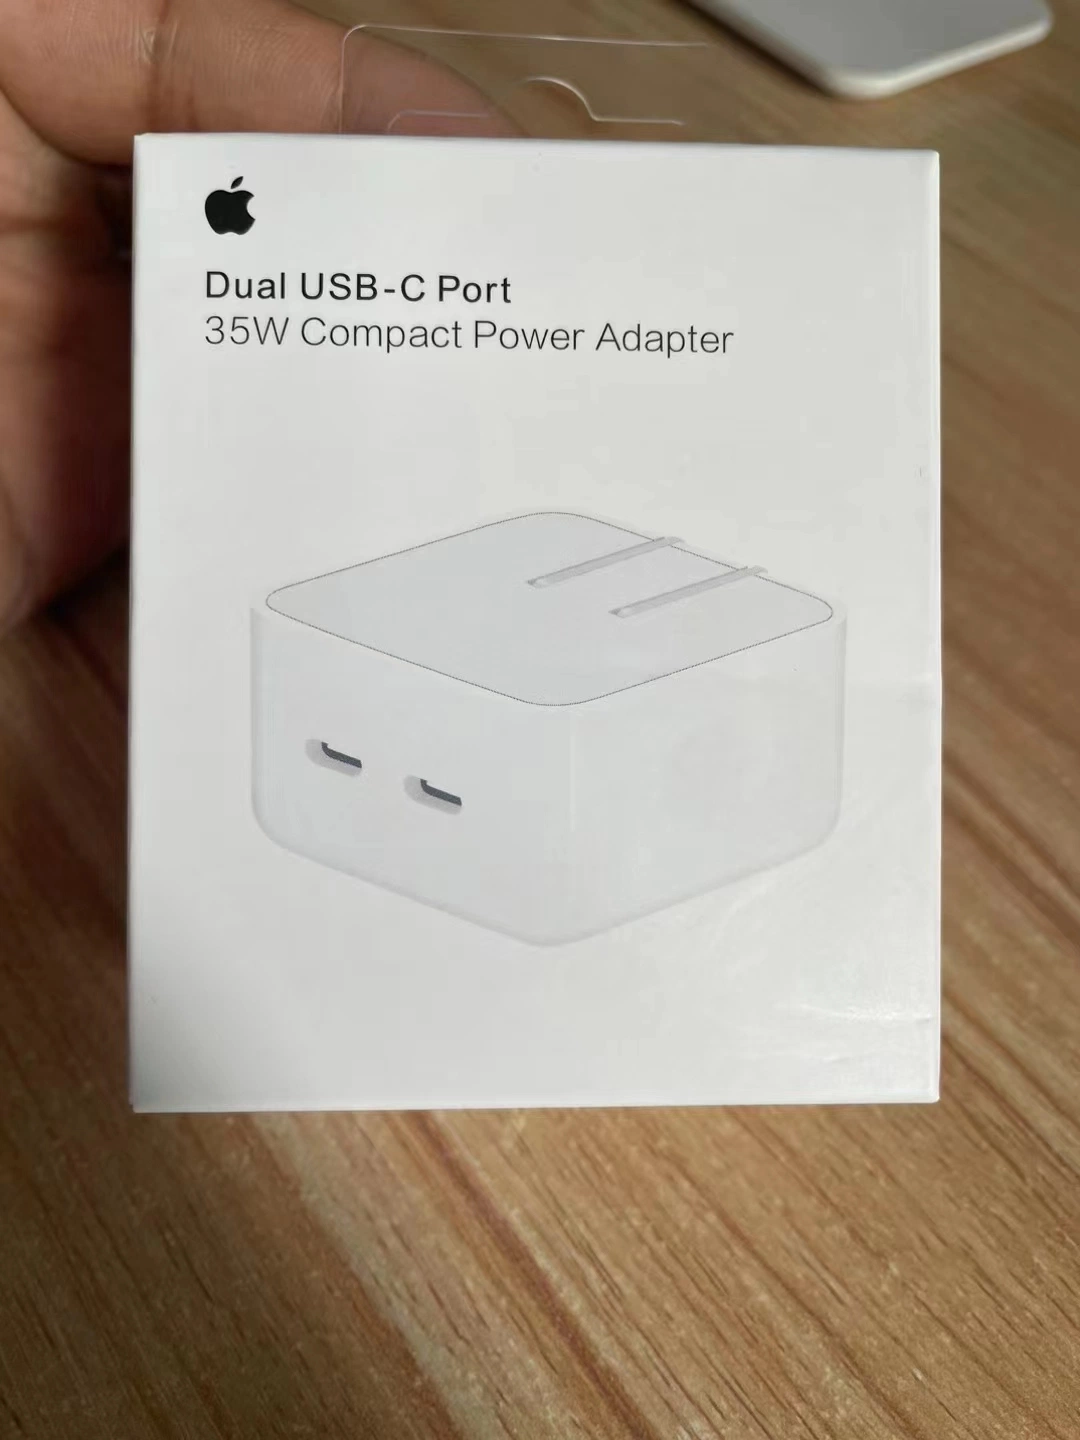 Mobile Phone Accessories USB Charger Adapter for Sale